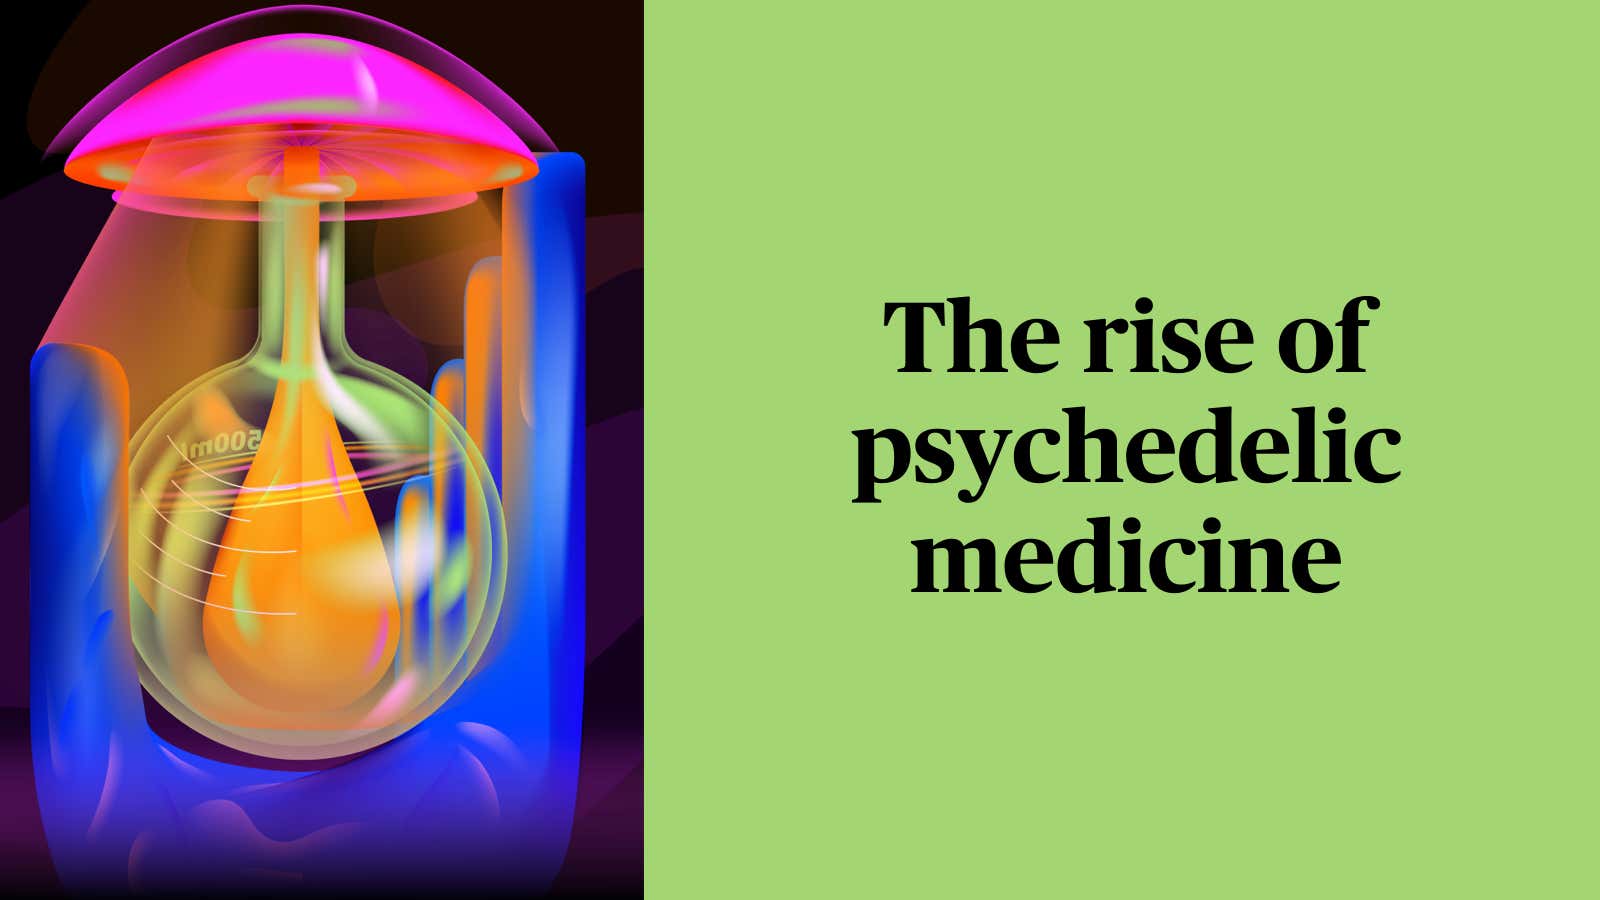 For members—The rise of psychedelic medicine